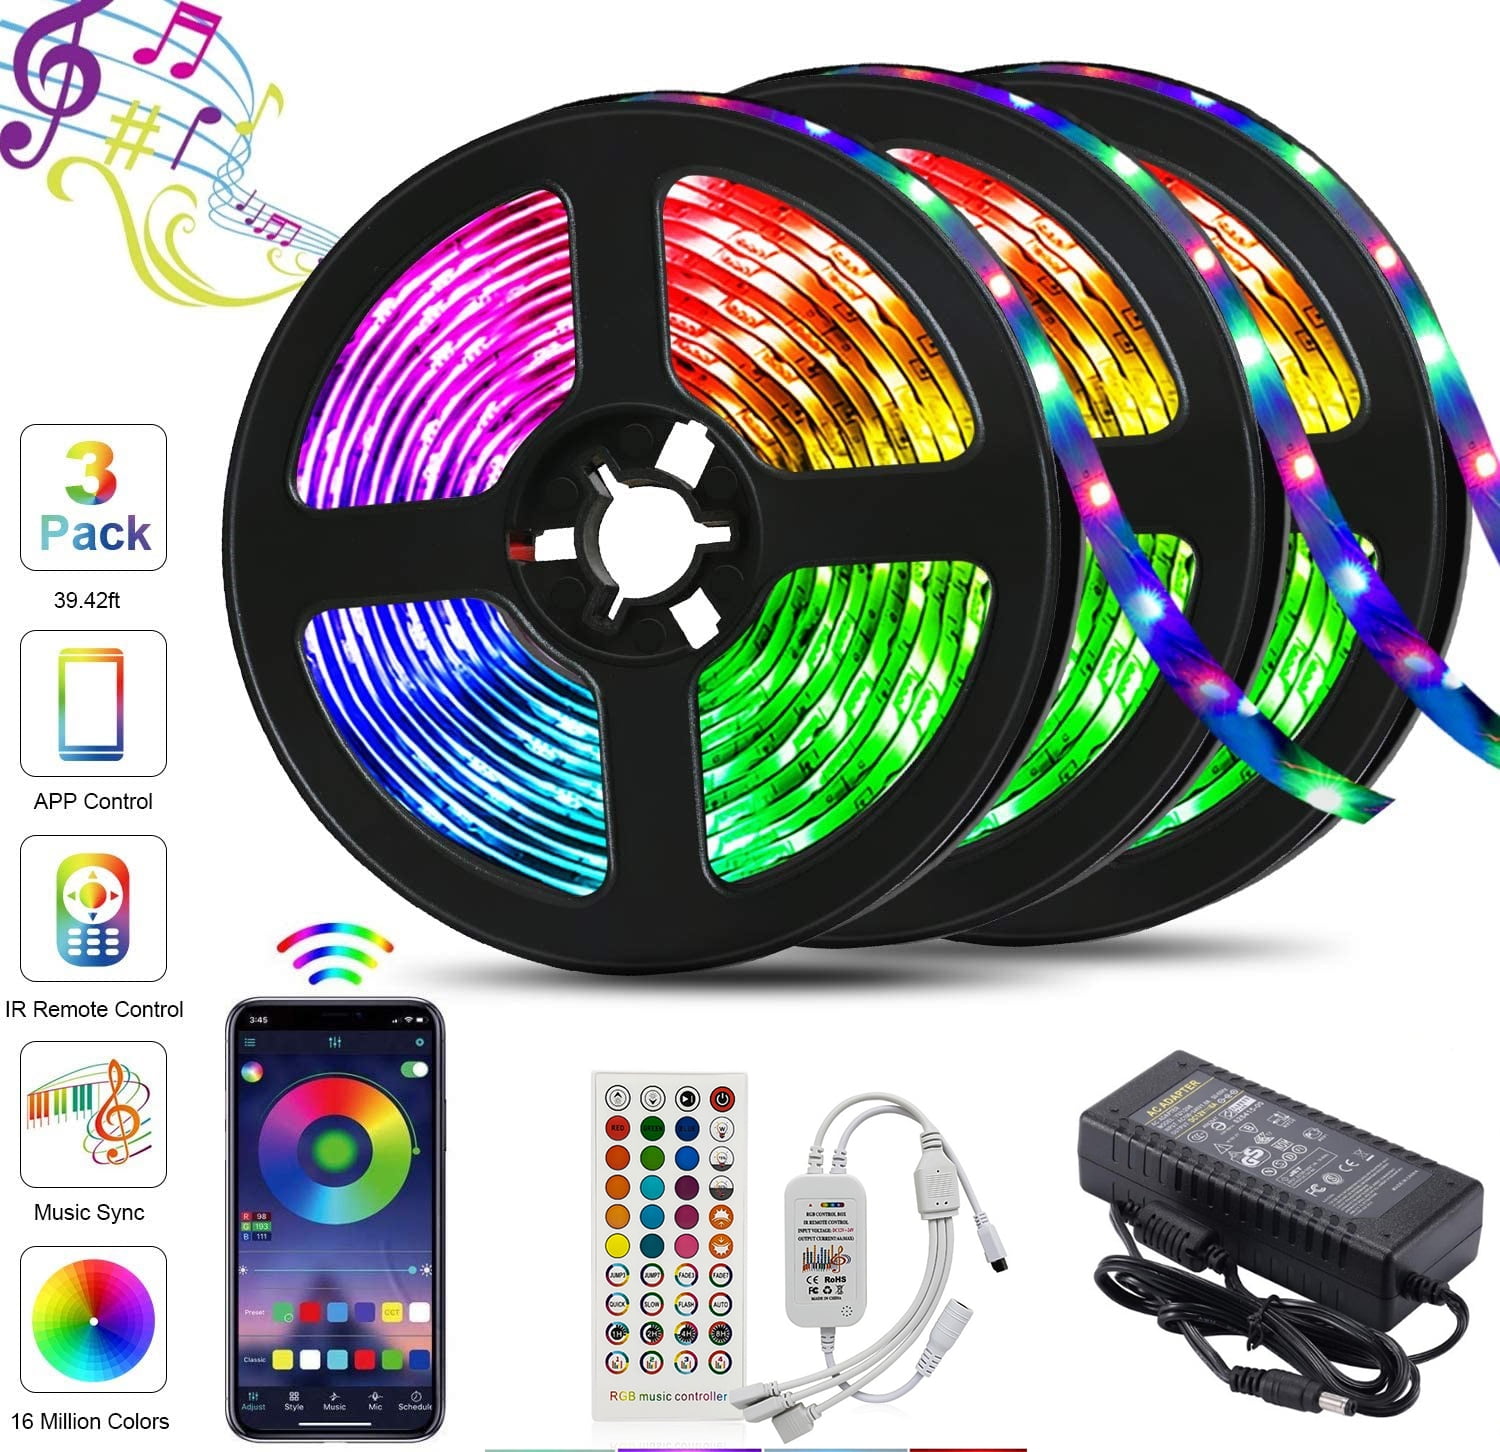 LED Strip Lights,15ft Waterproof Lights SMD 5050 RGB 900 LEDS Color Changing Rope Lights with Bluetooth Controller Sync to Music Apply for TV,Bedroom,Party and Home Decoration Walmart.com